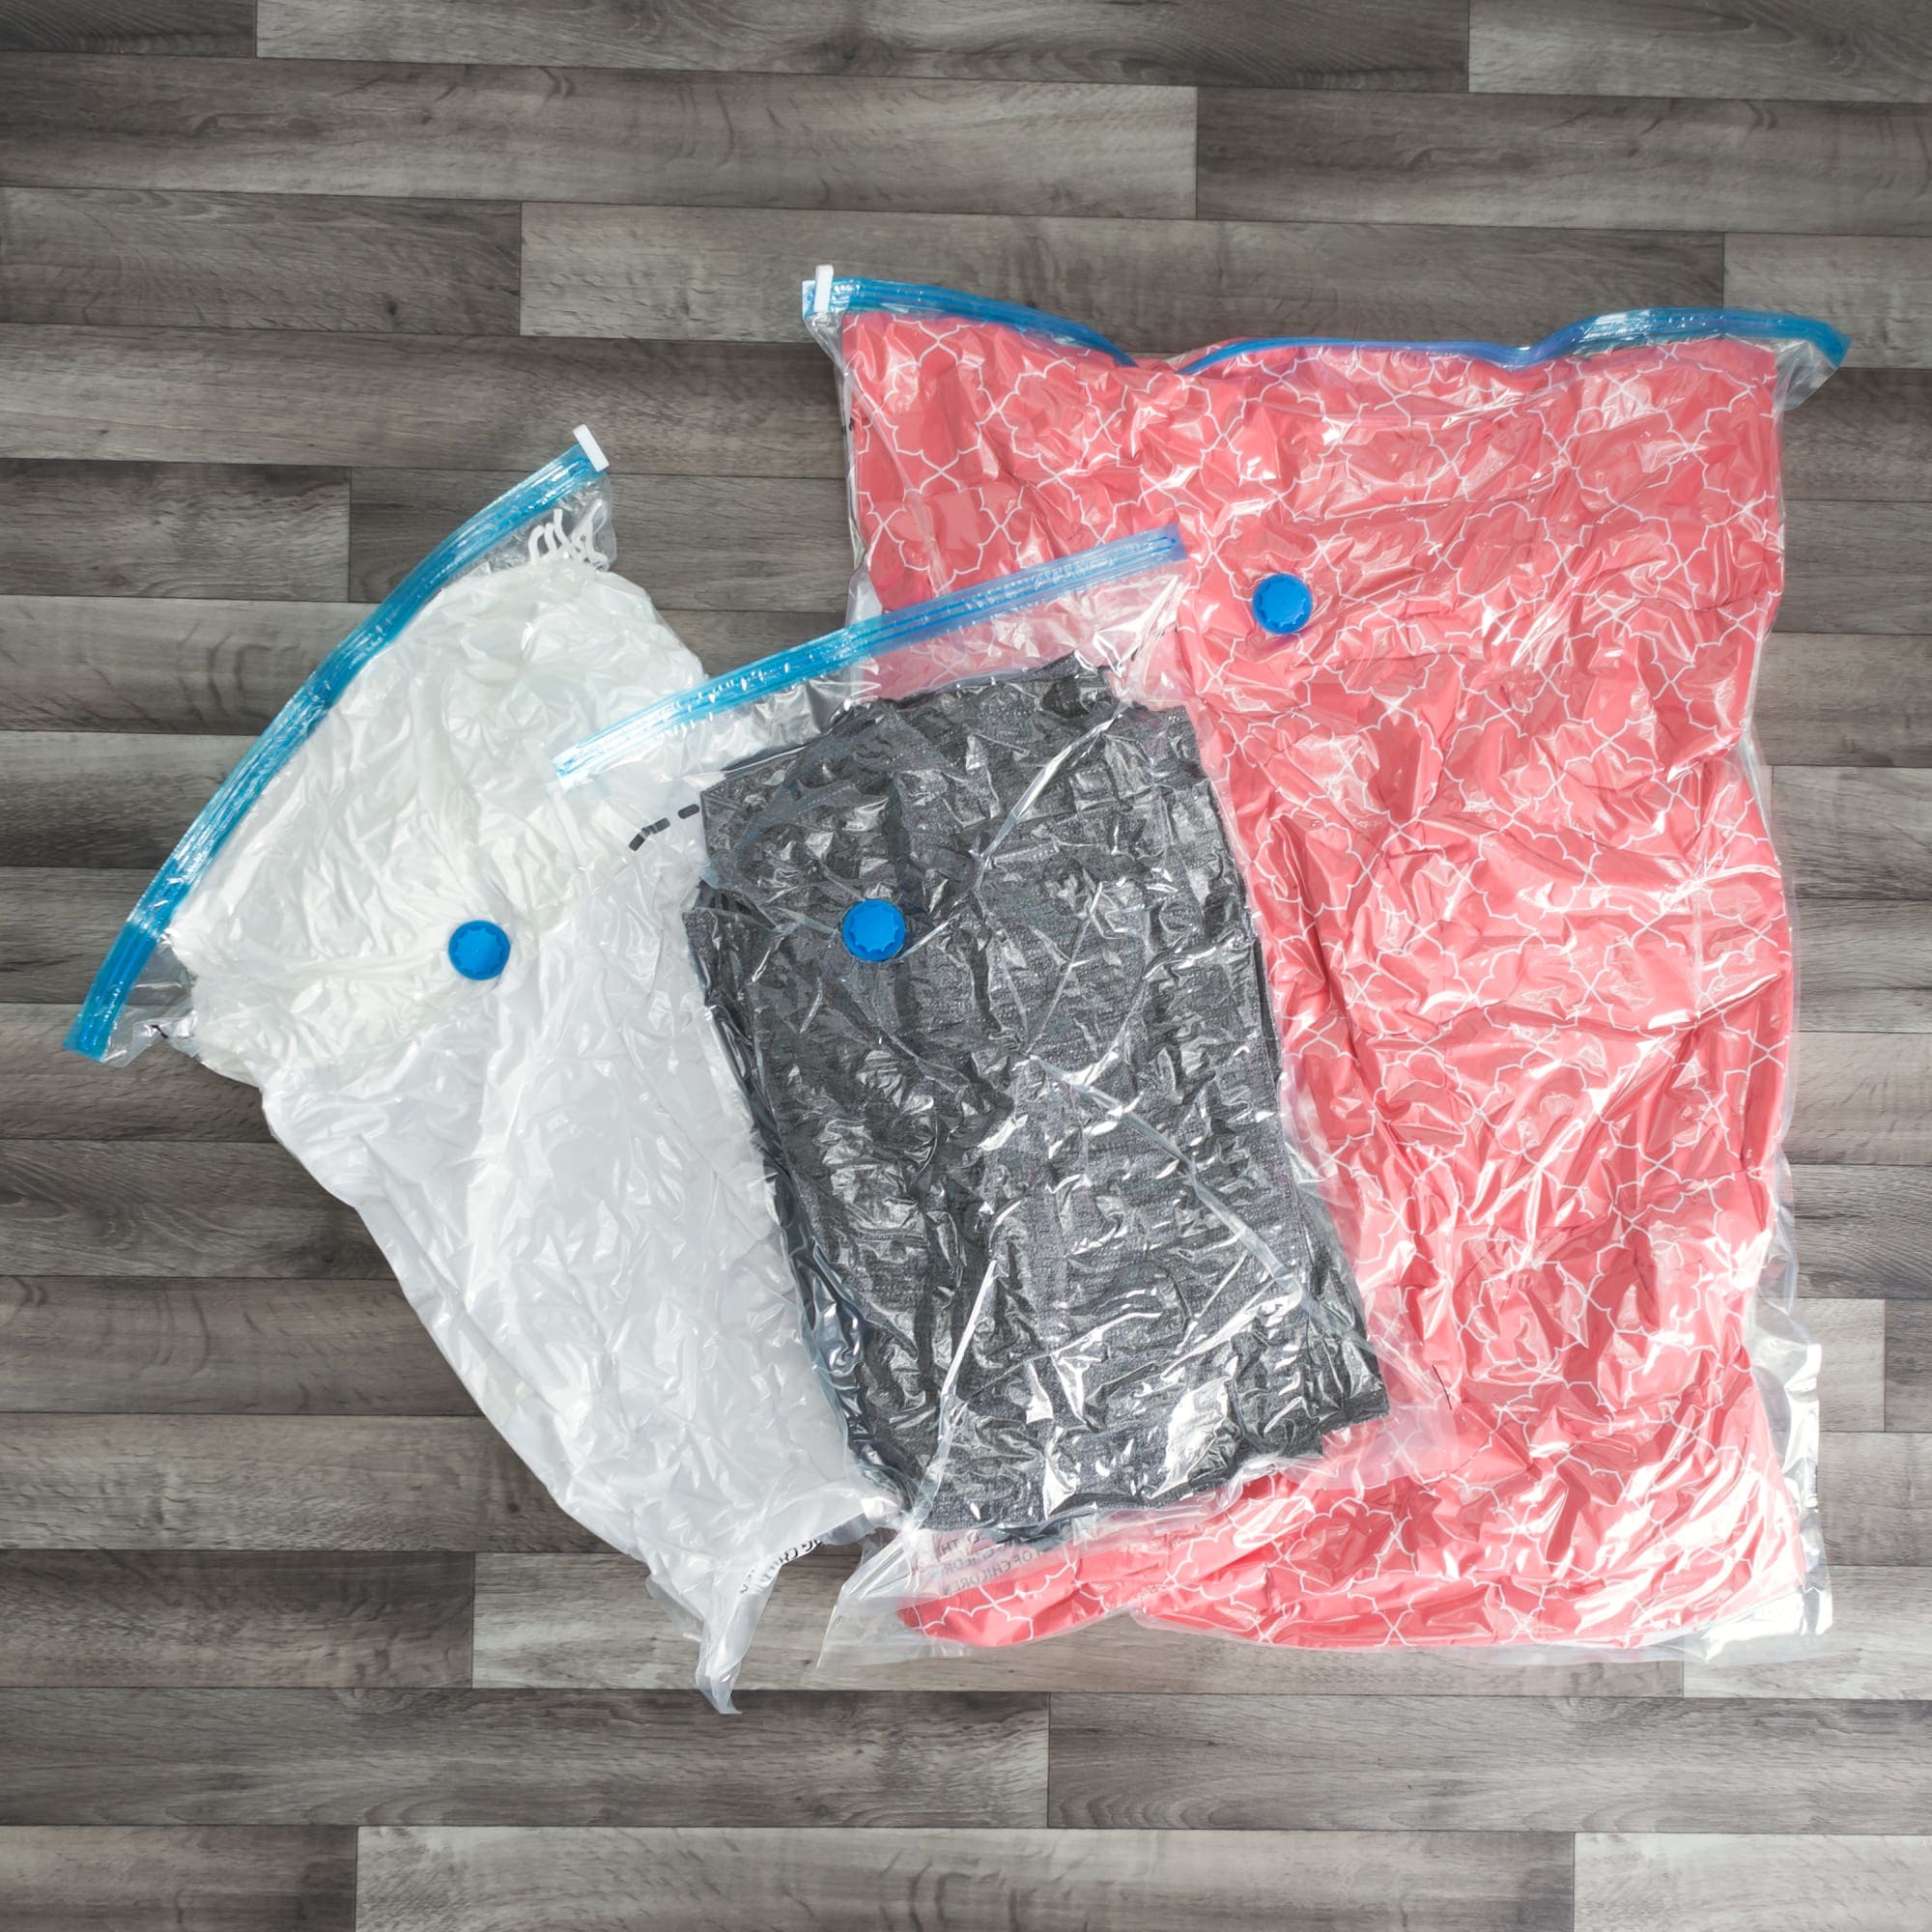 Vacuum Storage Bags I Space Saving Bags I Demo I How I packed so many  clothes in one Bag - YouTube